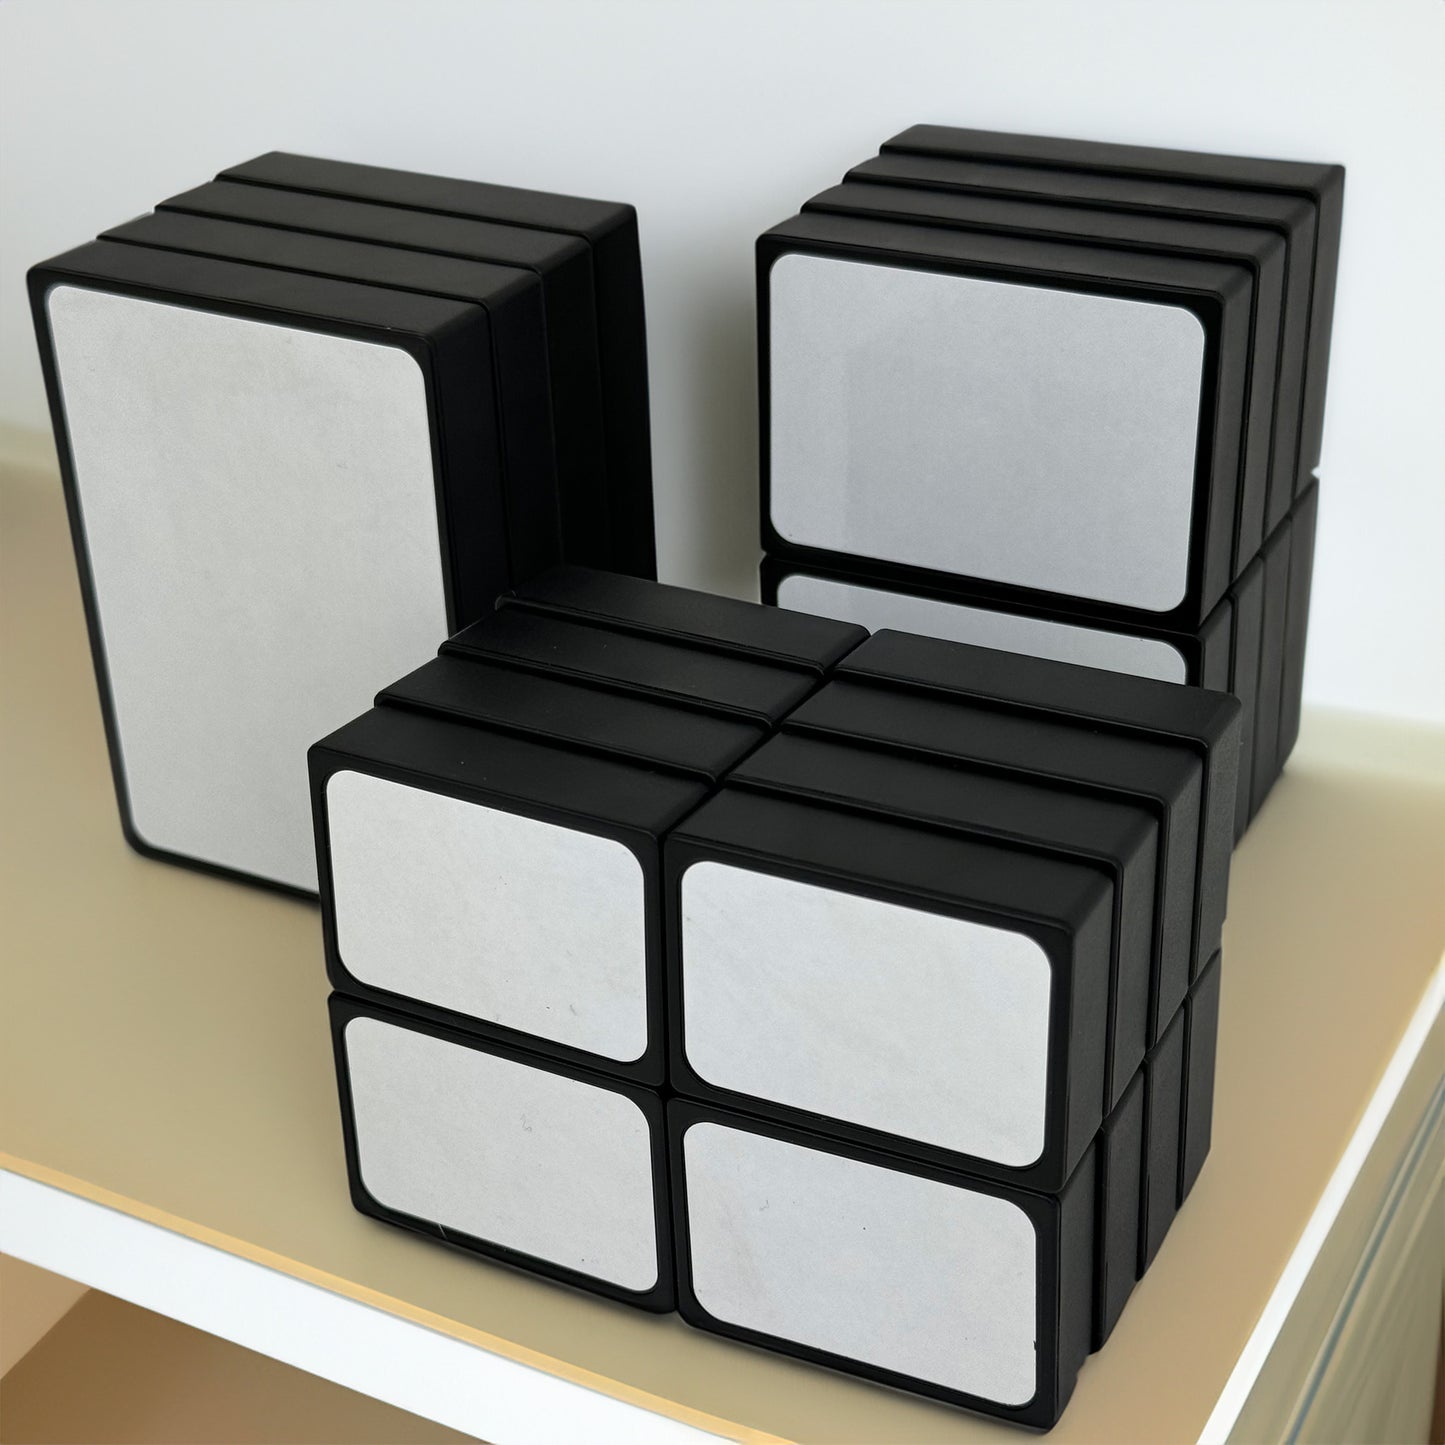 Switch-Its: Magnetic Dry Erase Blocks